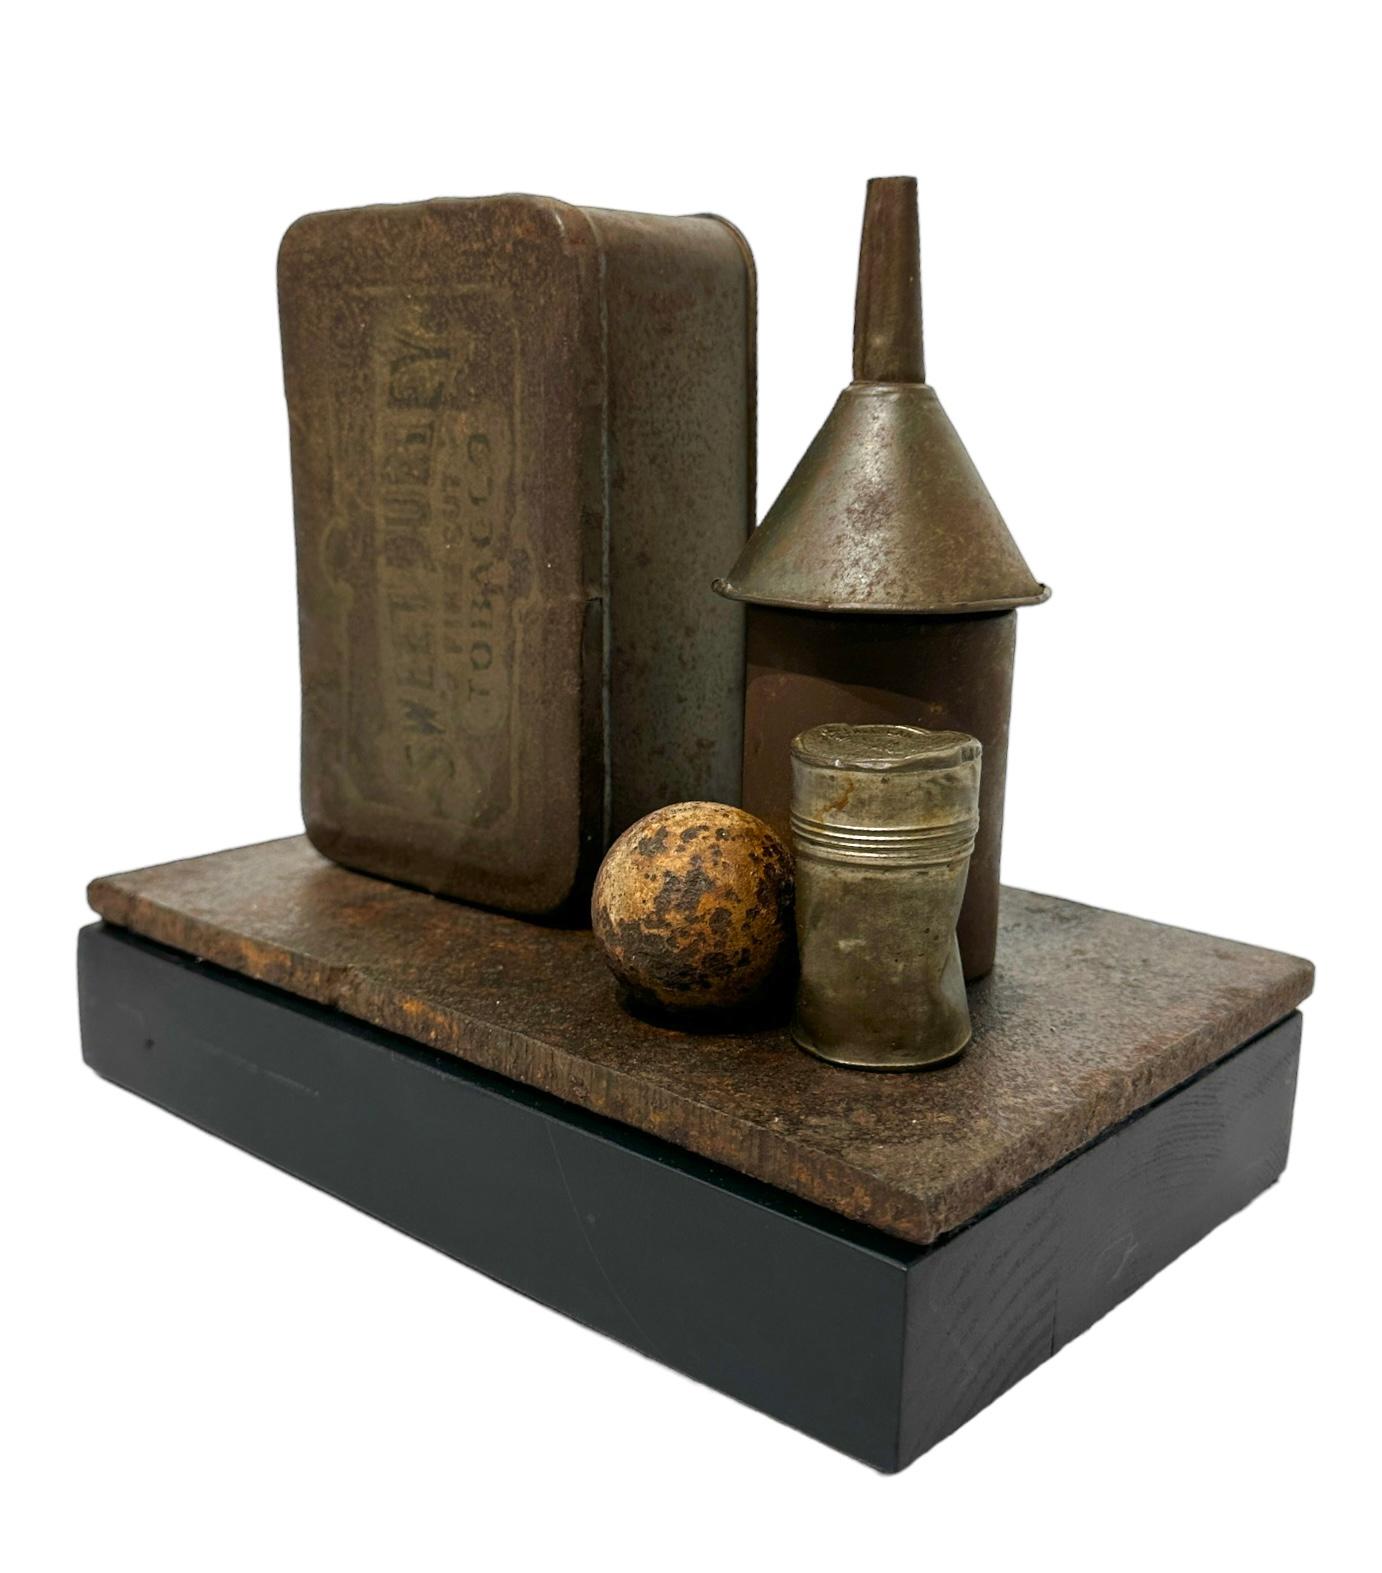 Jim Rose, known primarily for his steel furniture, was an avid collector and scoured salvage yards for unique, interesting items.  Here, a beautifully rusted tobacco box, a steel egg, a funnel and two small canisters are mounted to a steel base,